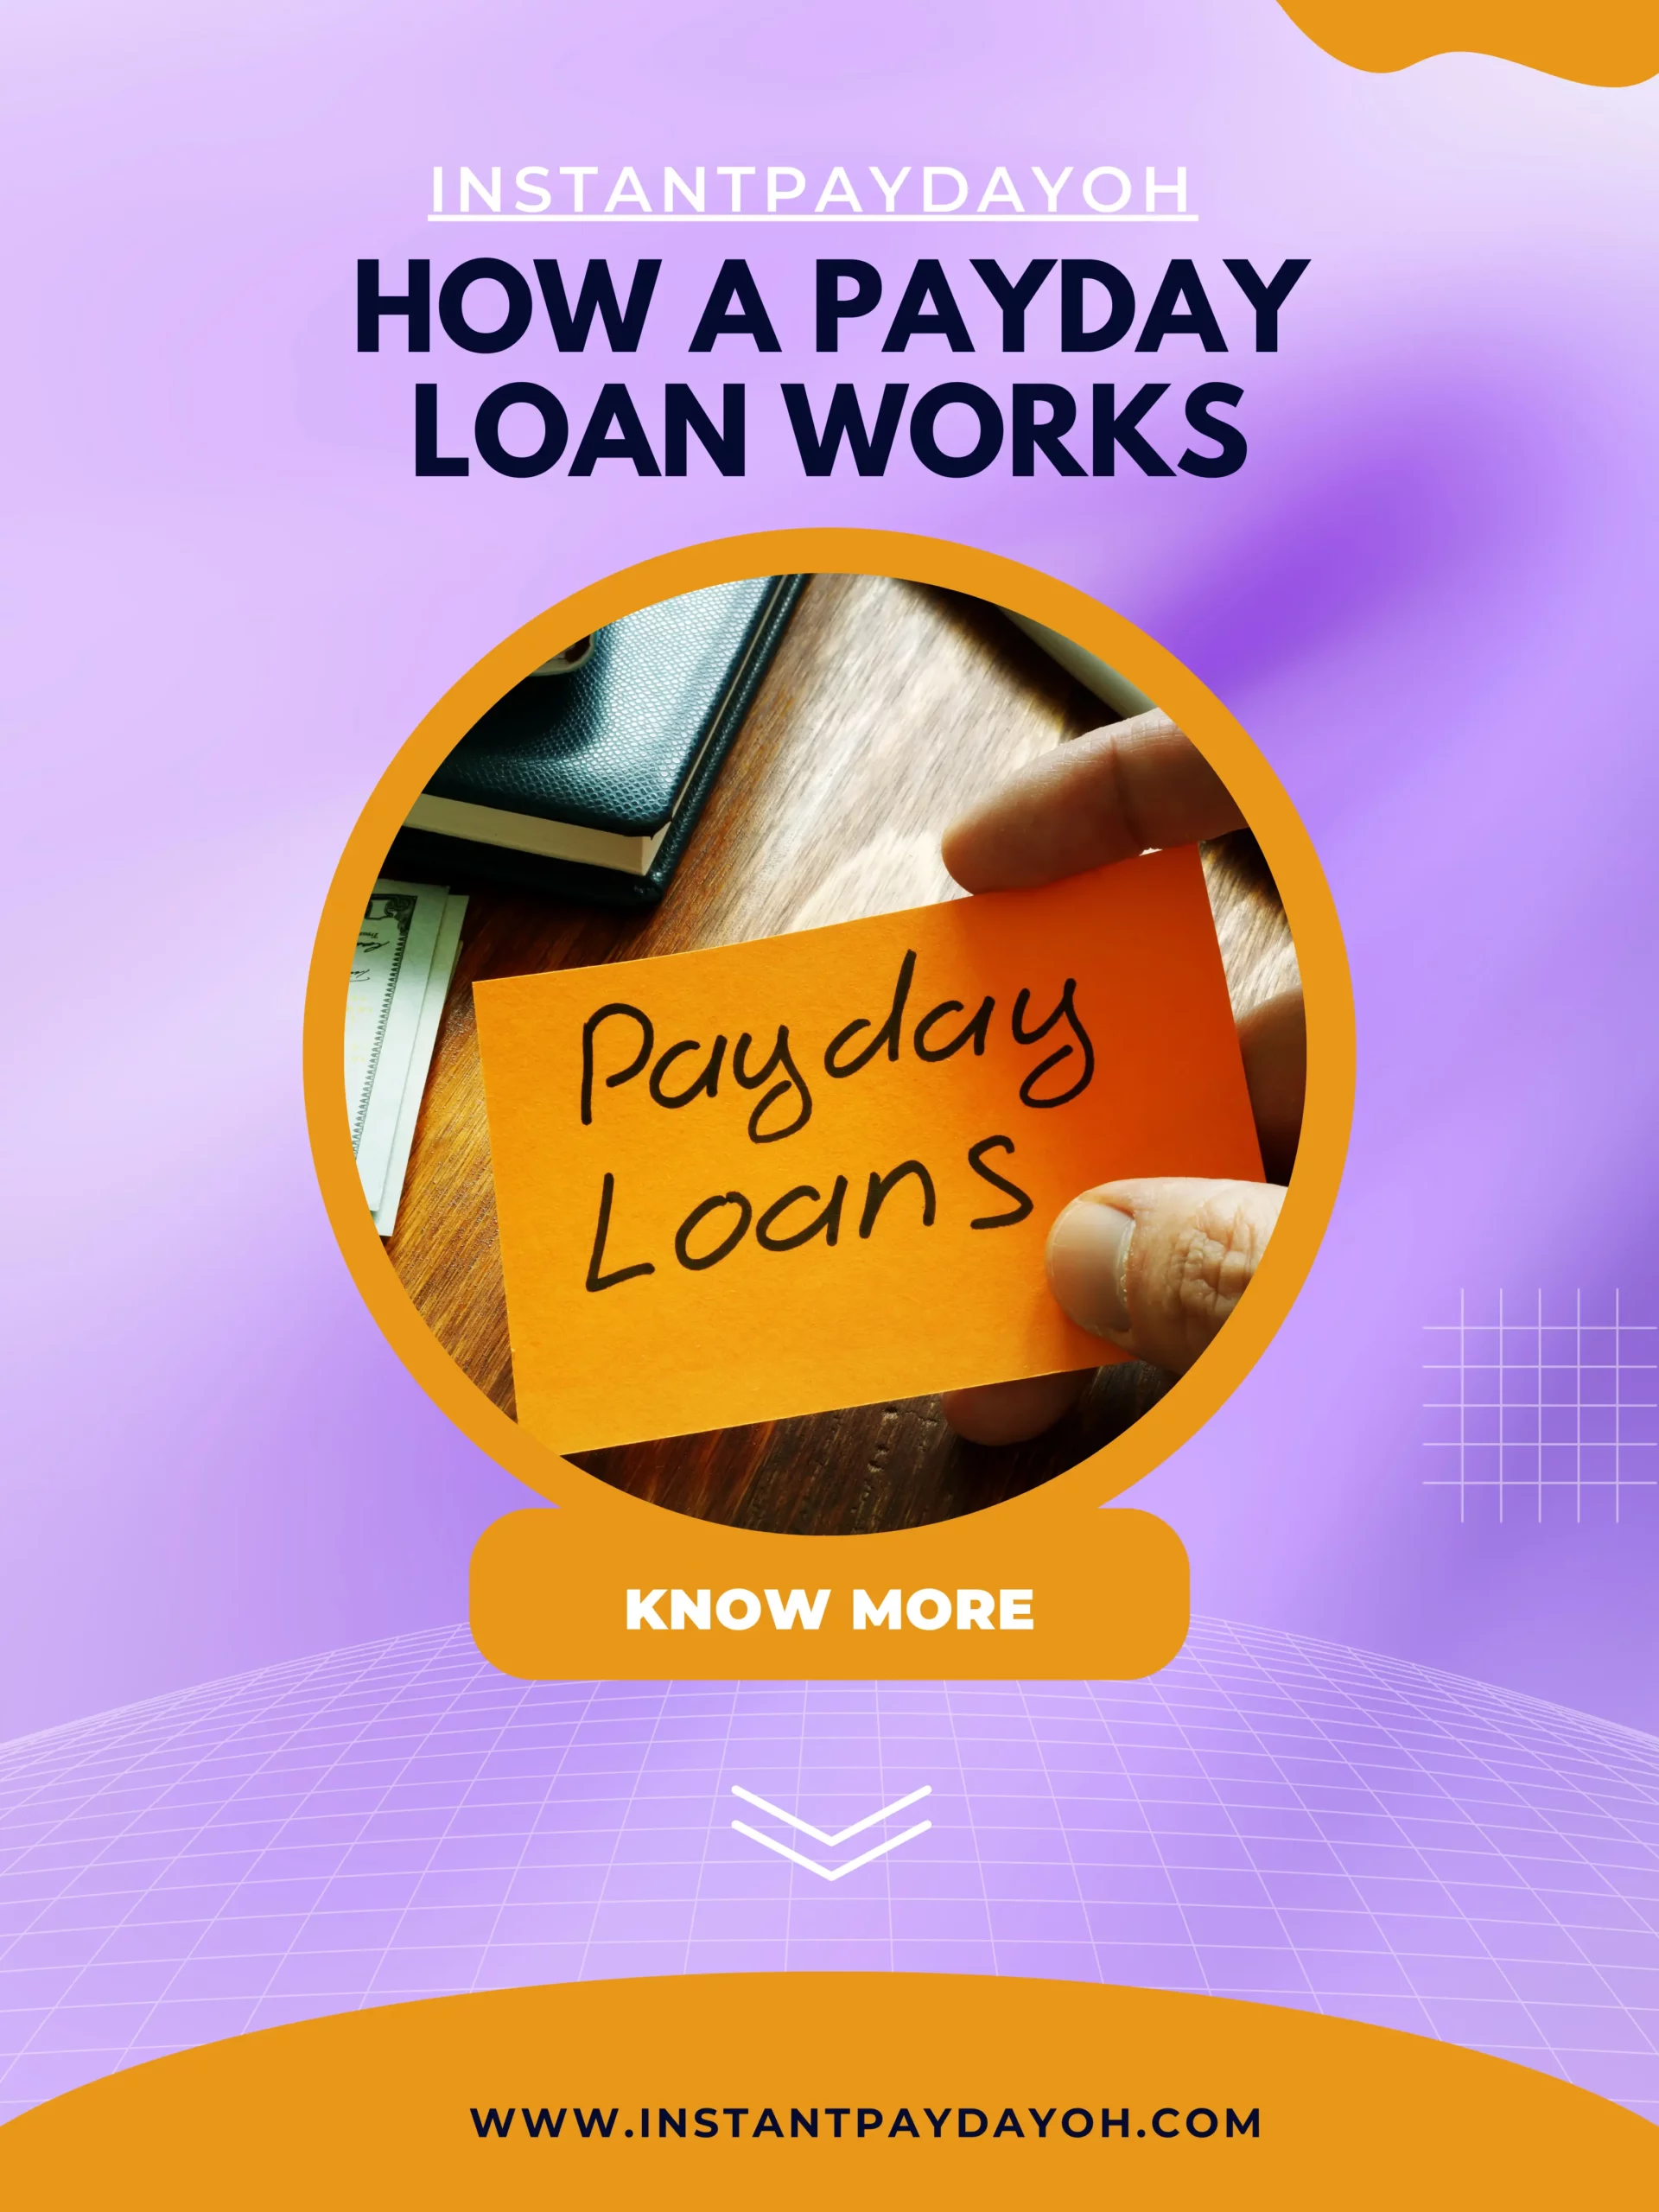 How a Payday Loan Works